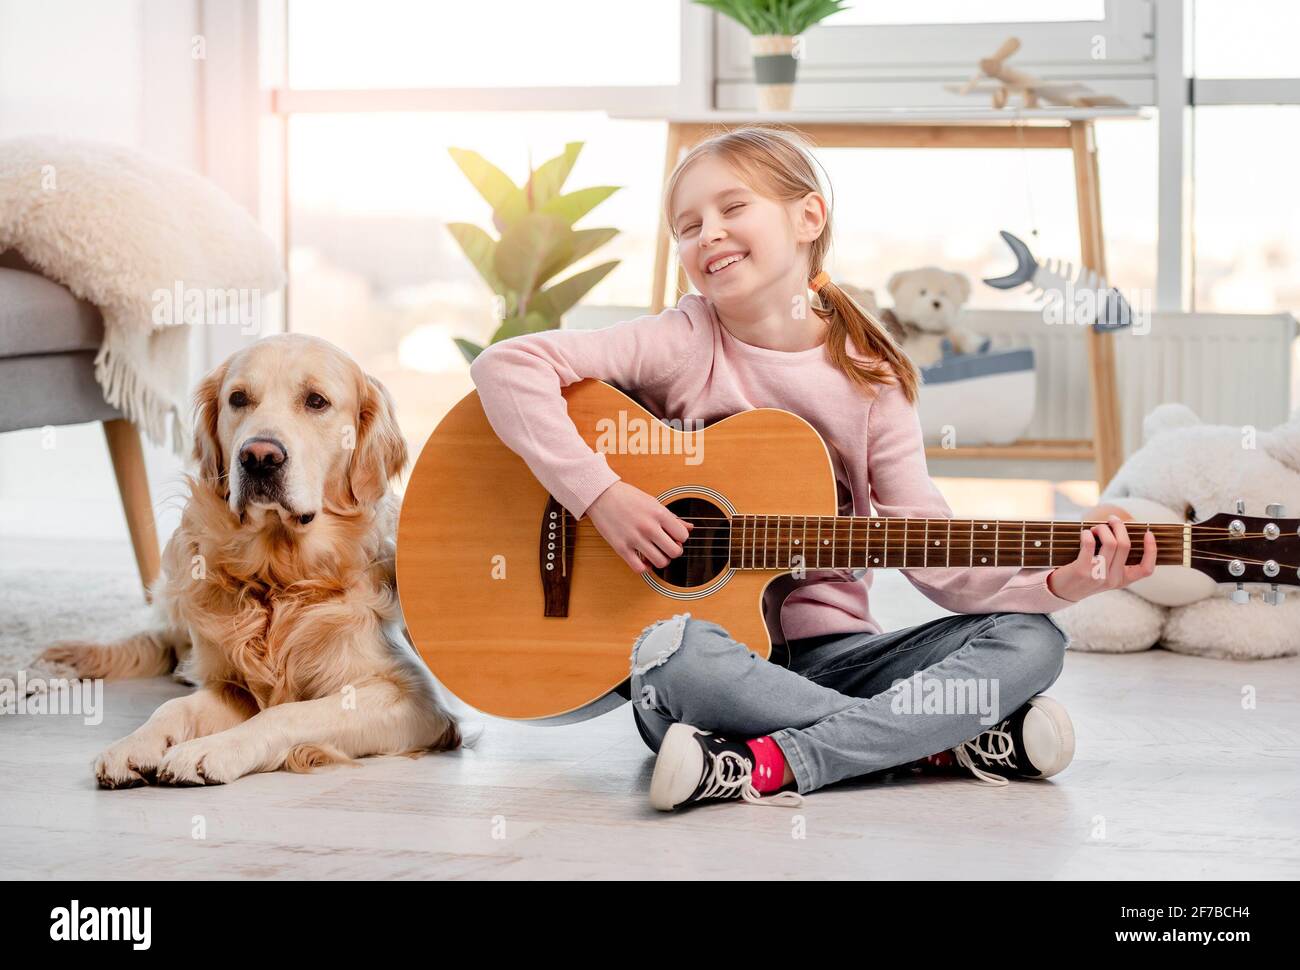 Little girl with guitar and golden retriever dog Stock Photo